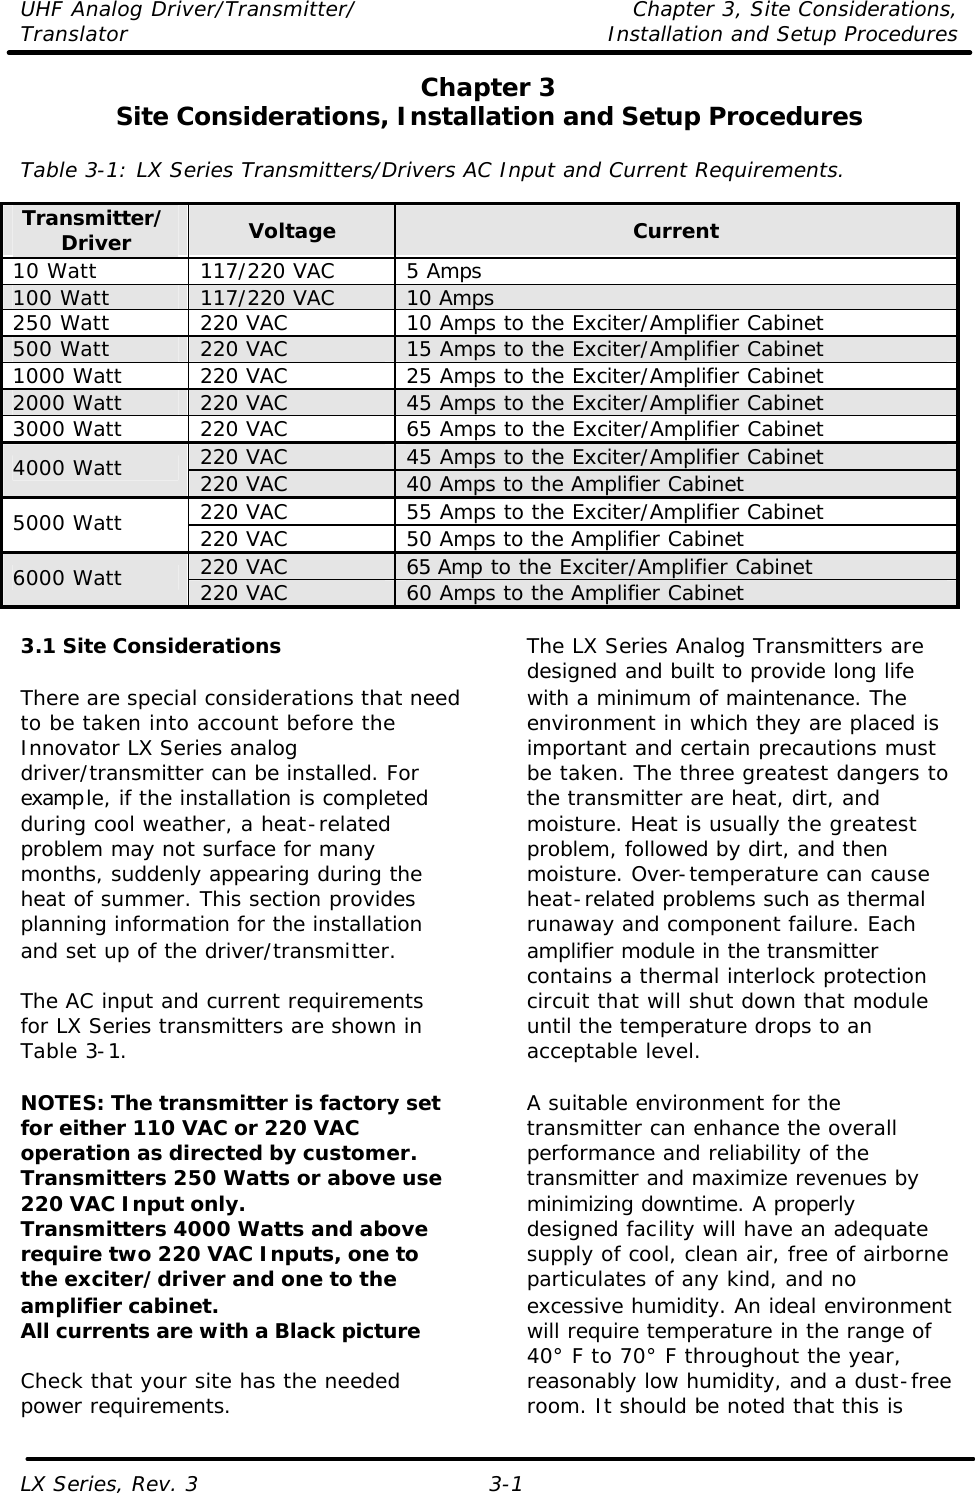 UHF Analog Driver/Transmitter/ Chapter 3, Site Considerations,  Translator Installation and Setup Procedures LX Series, Rev. 3 3-1 Chapter 3 Site Considerations, Installation and Setup Procedures  Table 3-1: LX Series Transmitters/Drivers AC Input and Current Requirements.  Transmitter/Driver Voltage Current 10 Watt 117/220 VAC 5 Amps 100 Watt 117/220 VAC 10 Amps 250 Watt 220 VAC 10 Amps to the Exciter/Amplifier Cabinet 500 Watt 220 VAC 15 Amps to the Exciter/Amplifier Cabinet 1000 Watt 220 VAC 25 Amps to the Exciter/Amplifier Cabinet 2000 Watt 220 VAC 45 Amps to the Exciter/Amplifier Cabinet 3000 Watt 220 VAC 65 Amps to the Exciter/Amplifier Cabinet 220 VAC 45 Amps to the Exciter/Amplifier Cabinet 4000 Watt 220 VAC 40 Amps to the Amplifier Cabinet 220 VAC 55 Amps to the Exciter/Amplifier Cabinet 5000 Watt 220 VAC 50 Amps to the Amplifier Cabinet 220 VAC 65 Amp to the Exciter/Amplifier Cabinet 6000 Watt 220 VAC 60 Amps to the Amplifier Cabinet  3.1 Site Considerations  There are special considerations that need to be taken into account before the Innovator LX Series analog driver/transmitter can be installed. For example, if the installation is completed during cool weather, a heat-related problem may not surface for many months, suddenly appearing during the heat of summer. This section provides planning information for the installation and set up of the driver/transmitter.  The AC input and current requirements for LX Series transmitters are shown in Table 3-1.  NOTES: The transmitter is factory set for either 110 VAC or 220 VAC operation as directed by customer.  Transmitters 250 Watts or above use 220 VAC Input only. Transmitters 4000 Watts and above require two 220 VAC Inputs, one to the exciter/driver and one to the amplifier cabinet. All currents are with a Black picture  Check that your site has the needed power requirements. The LX Series Analog Transmitters are designed and built to provide long life with a minimum of maintenance. The environment in which they are placed is important and certain precautions must be taken. The three greatest dangers to the transmitter are heat, dirt, and moisture. Heat is usually the greatest problem, followed by dirt, and then moisture. Over-temperature can cause heat-related problems such as thermal runaway and component failure. Each amplifier module in the transmitter contains a thermal interlock protection circuit that will shut down that module until the temperature drops to an acceptable level.  A suitable environment for the transmitter can enhance the overall performance and reliability of the transmitter and maximize revenues by minimizing downtime. A properly designed facility will have an adequate supply of cool, clean air, free of airborne particulates of any kind, and no excessive humidity. An ideal environment will require temperature in the range of 40° F to 70° F throughout the year, reasonably low humidity, and a dust-free room. It should be noted that this is 